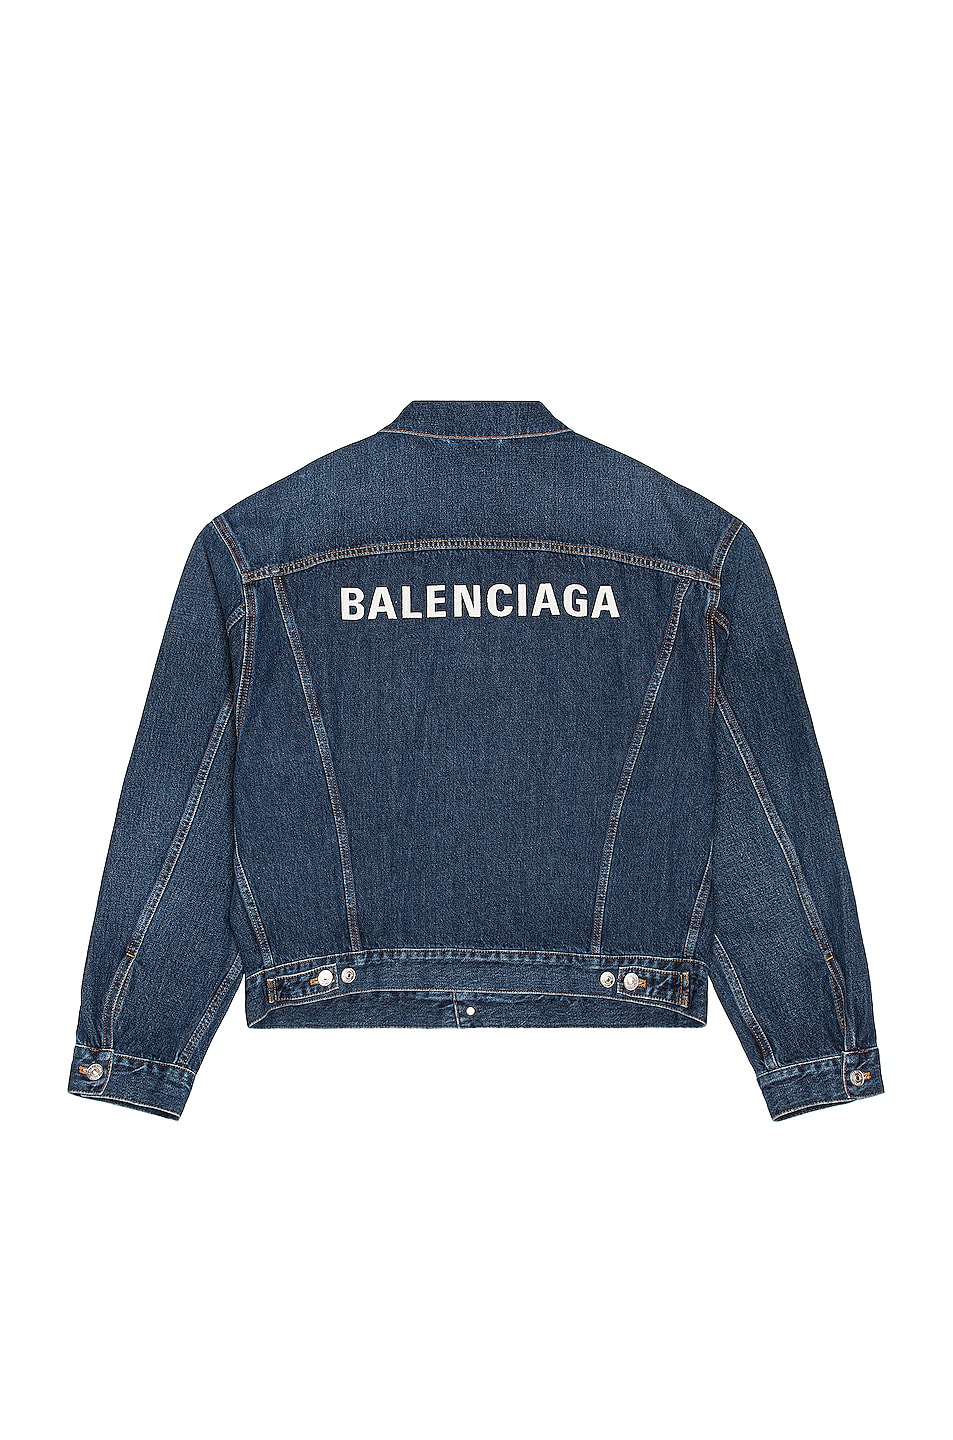 Image 1 of Balenciaga Large Fit Jacket in Daddy Wash